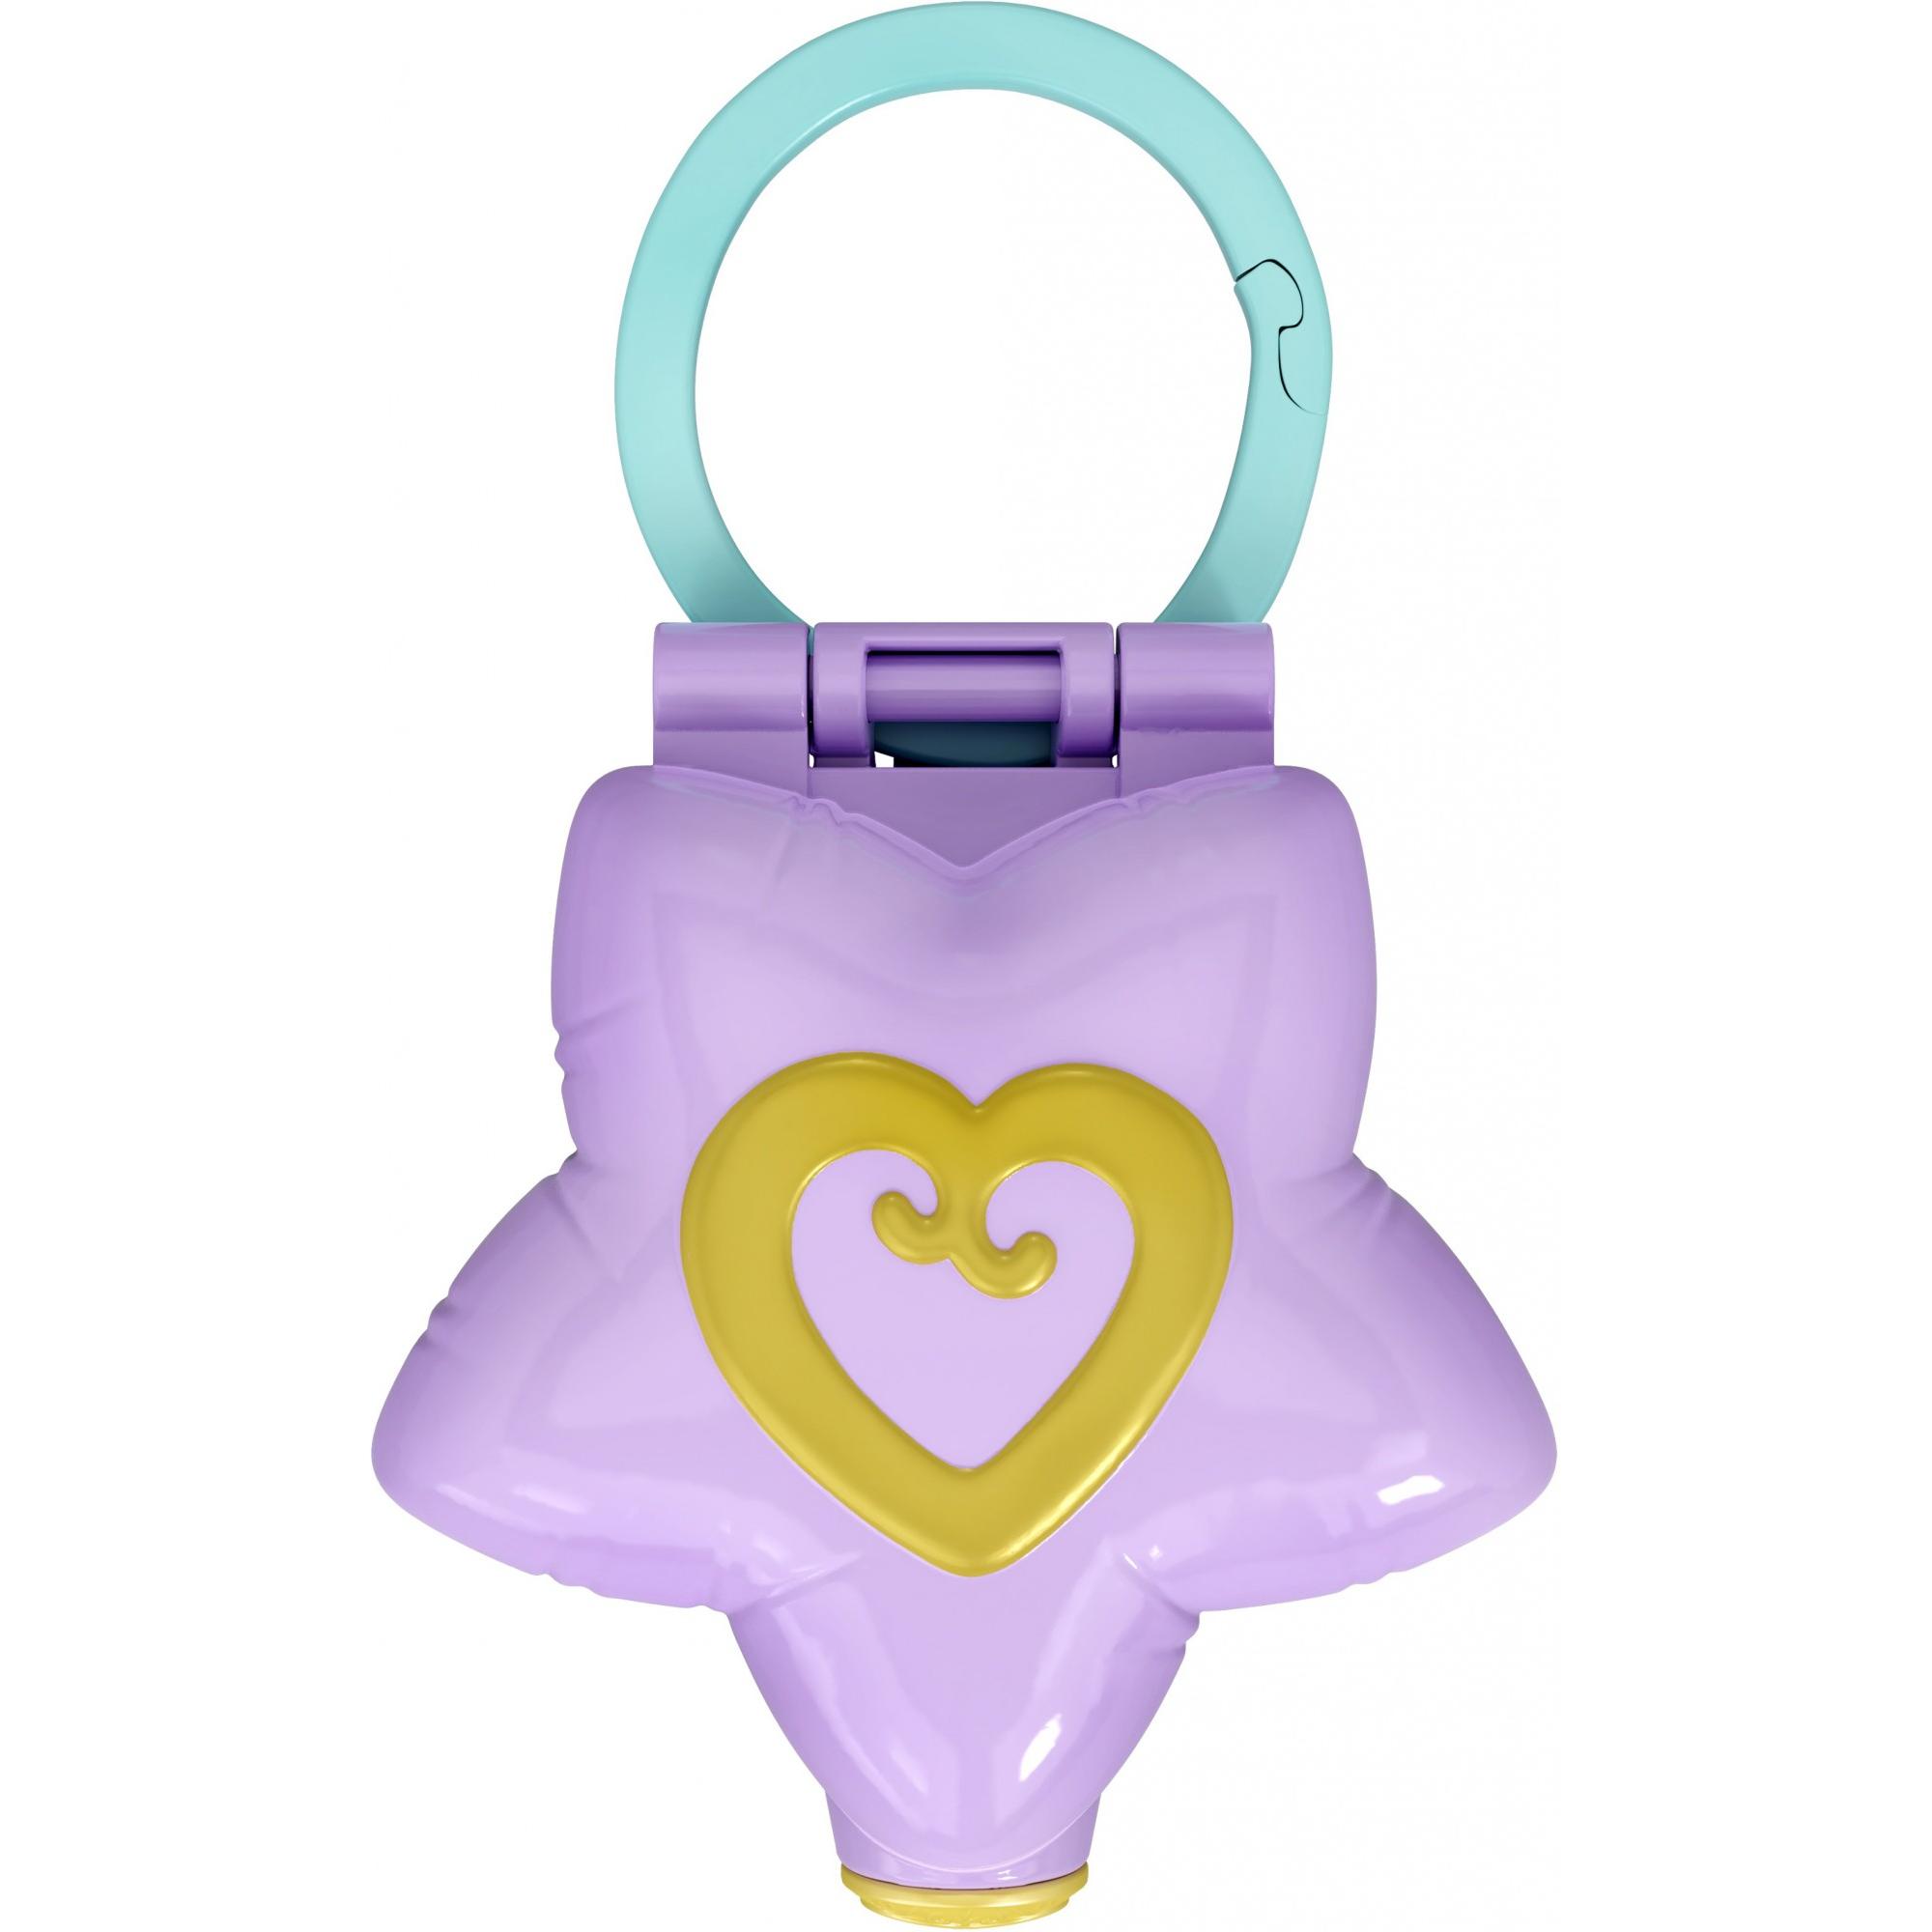 Polly Pocket Tiny Pocket Places Birthday Compact, Doll & Accessories - image 5 of 6